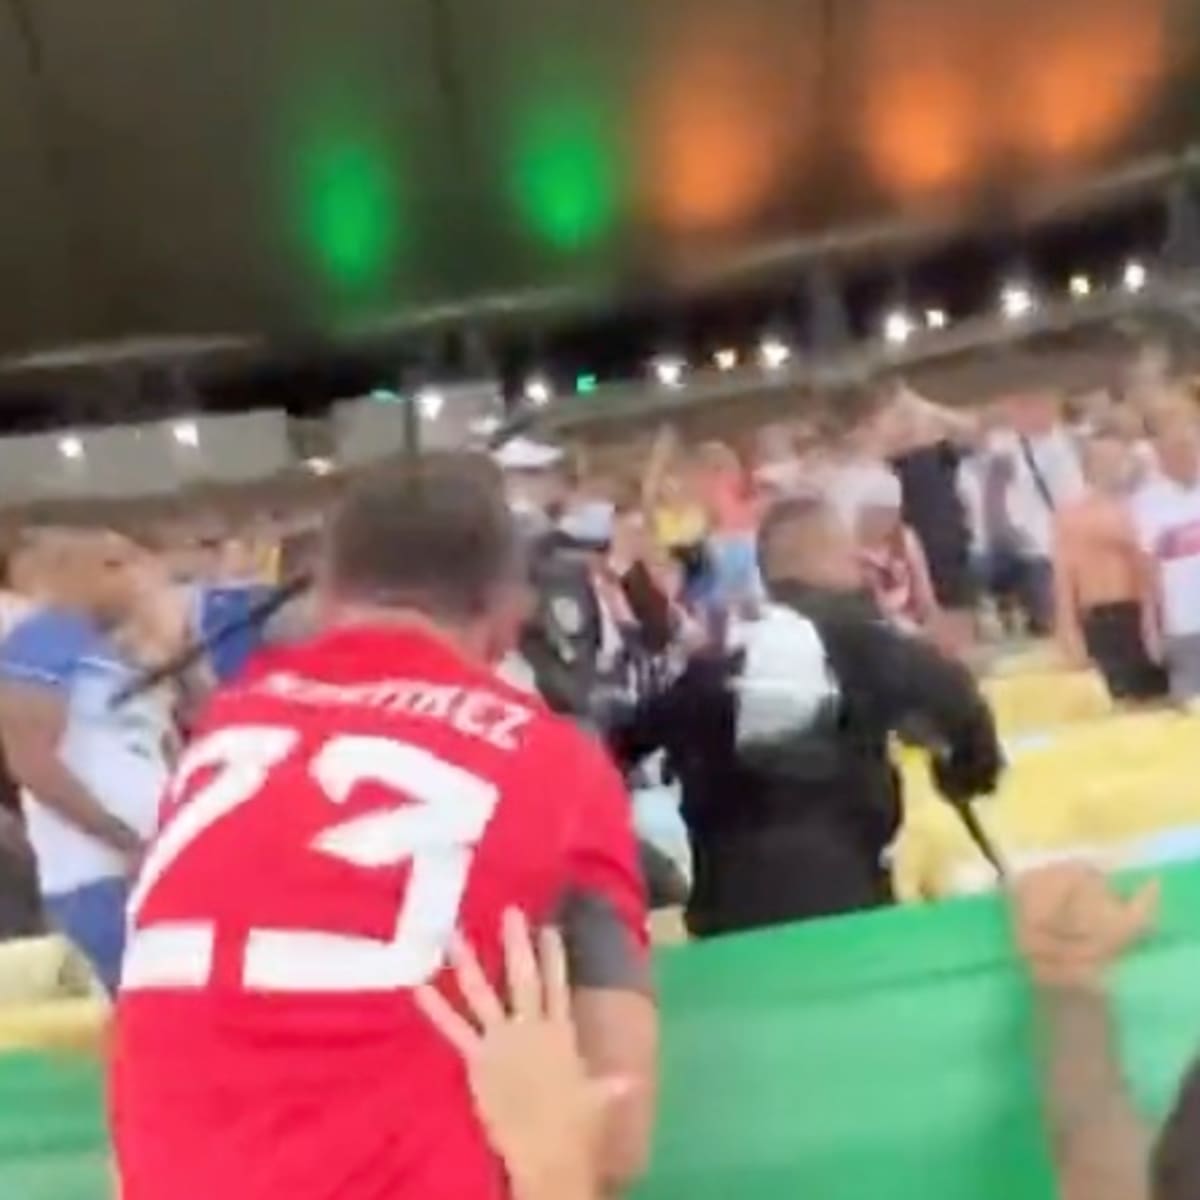 Brazil-Argentina delayed after fight breaks out between fans and police;  Dibu Martinez gets involved 